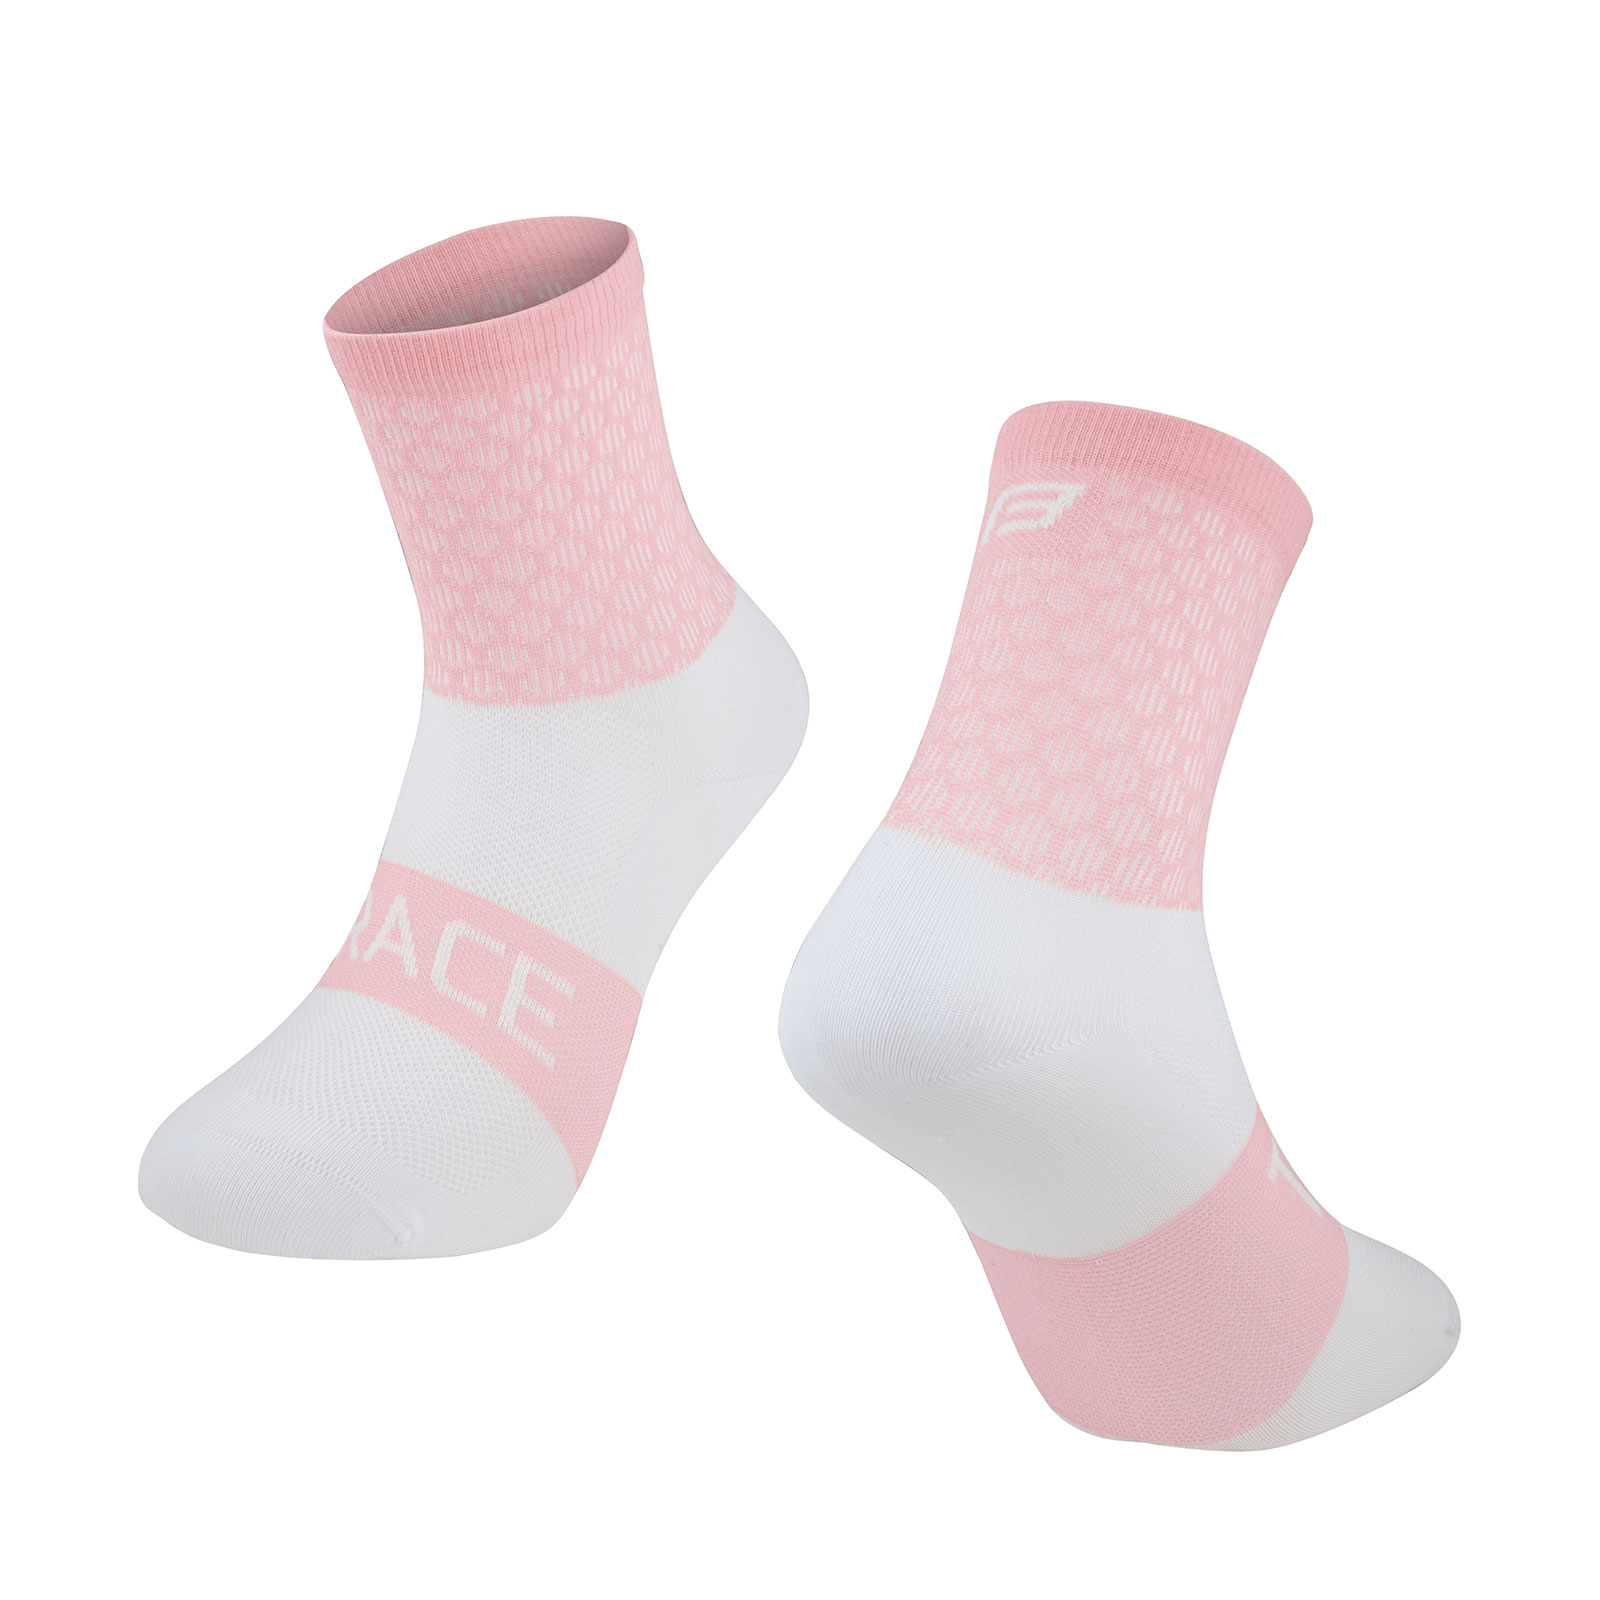 FORCE TRACE, pink/white, socks